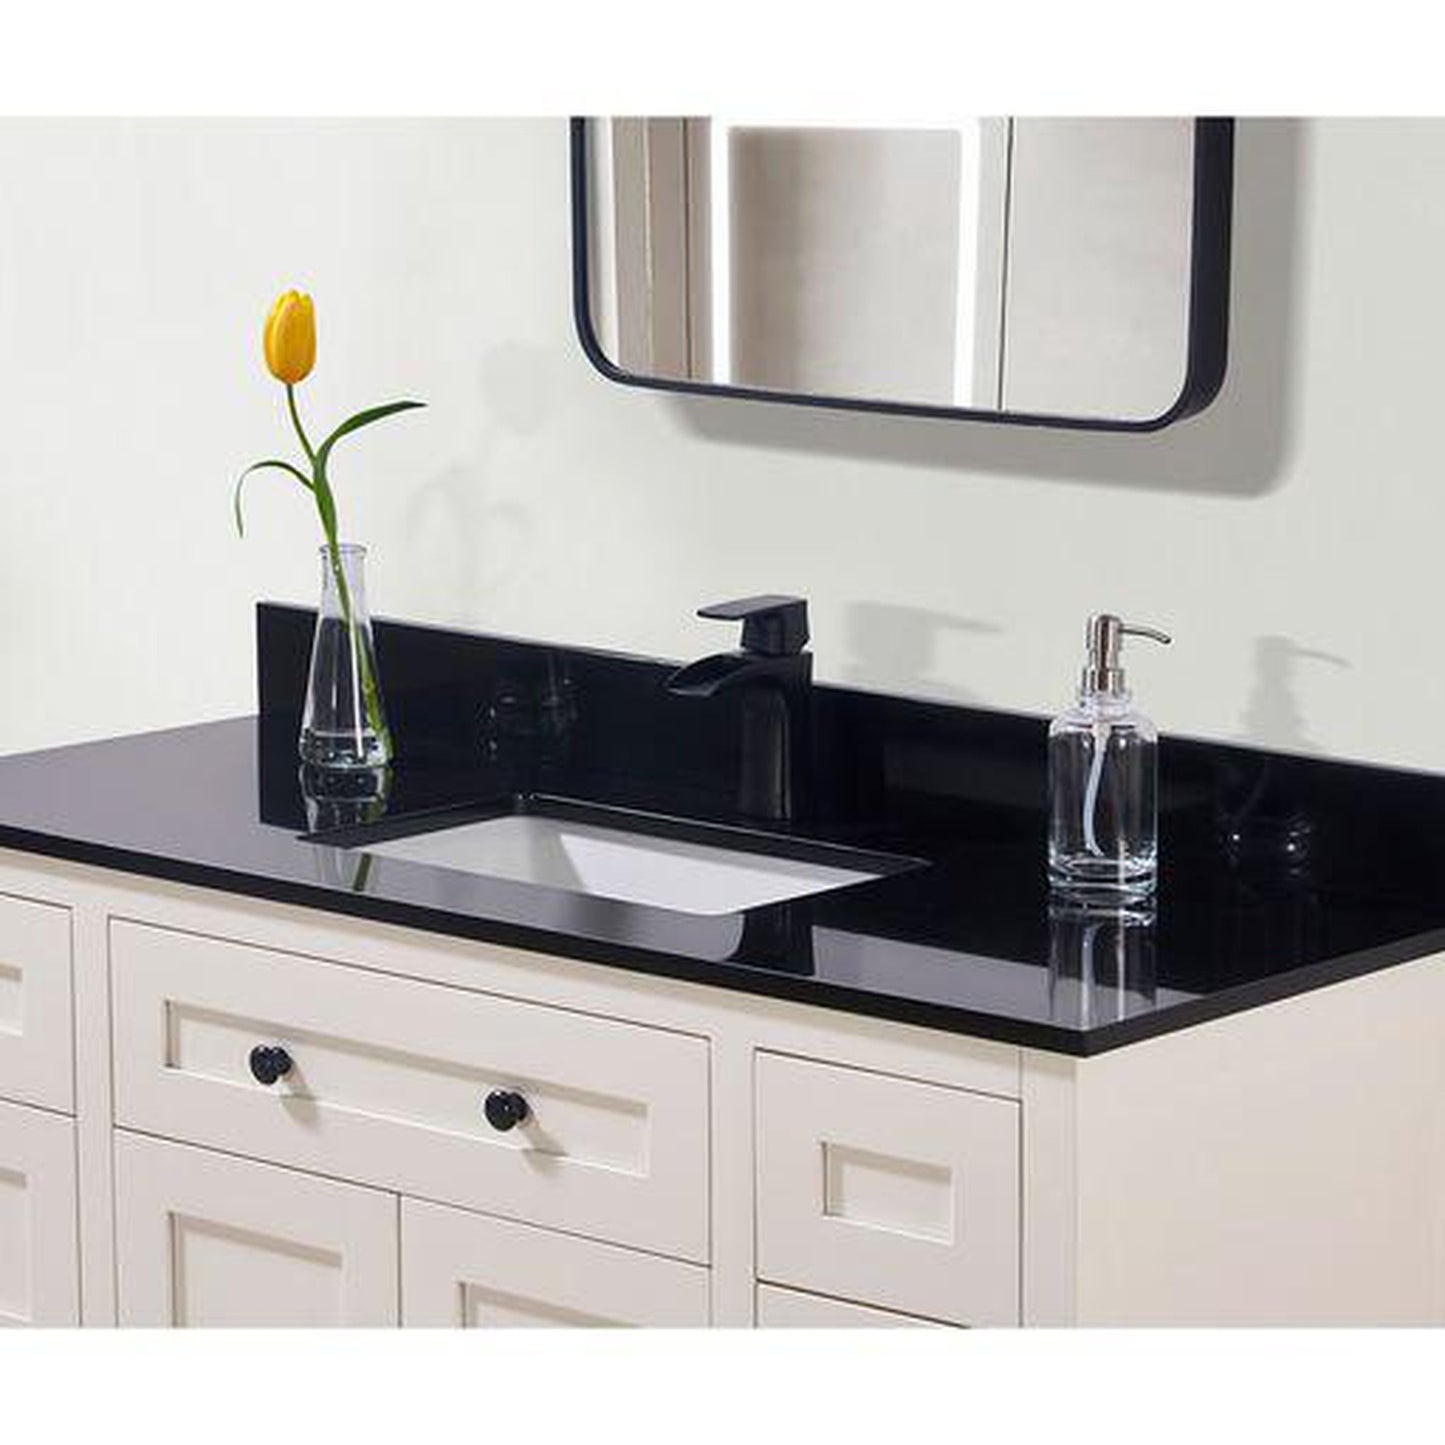 Altair Feltre 49" x 22" Imperial Black Composite Stone Bathroom Vanity Top With White SInk